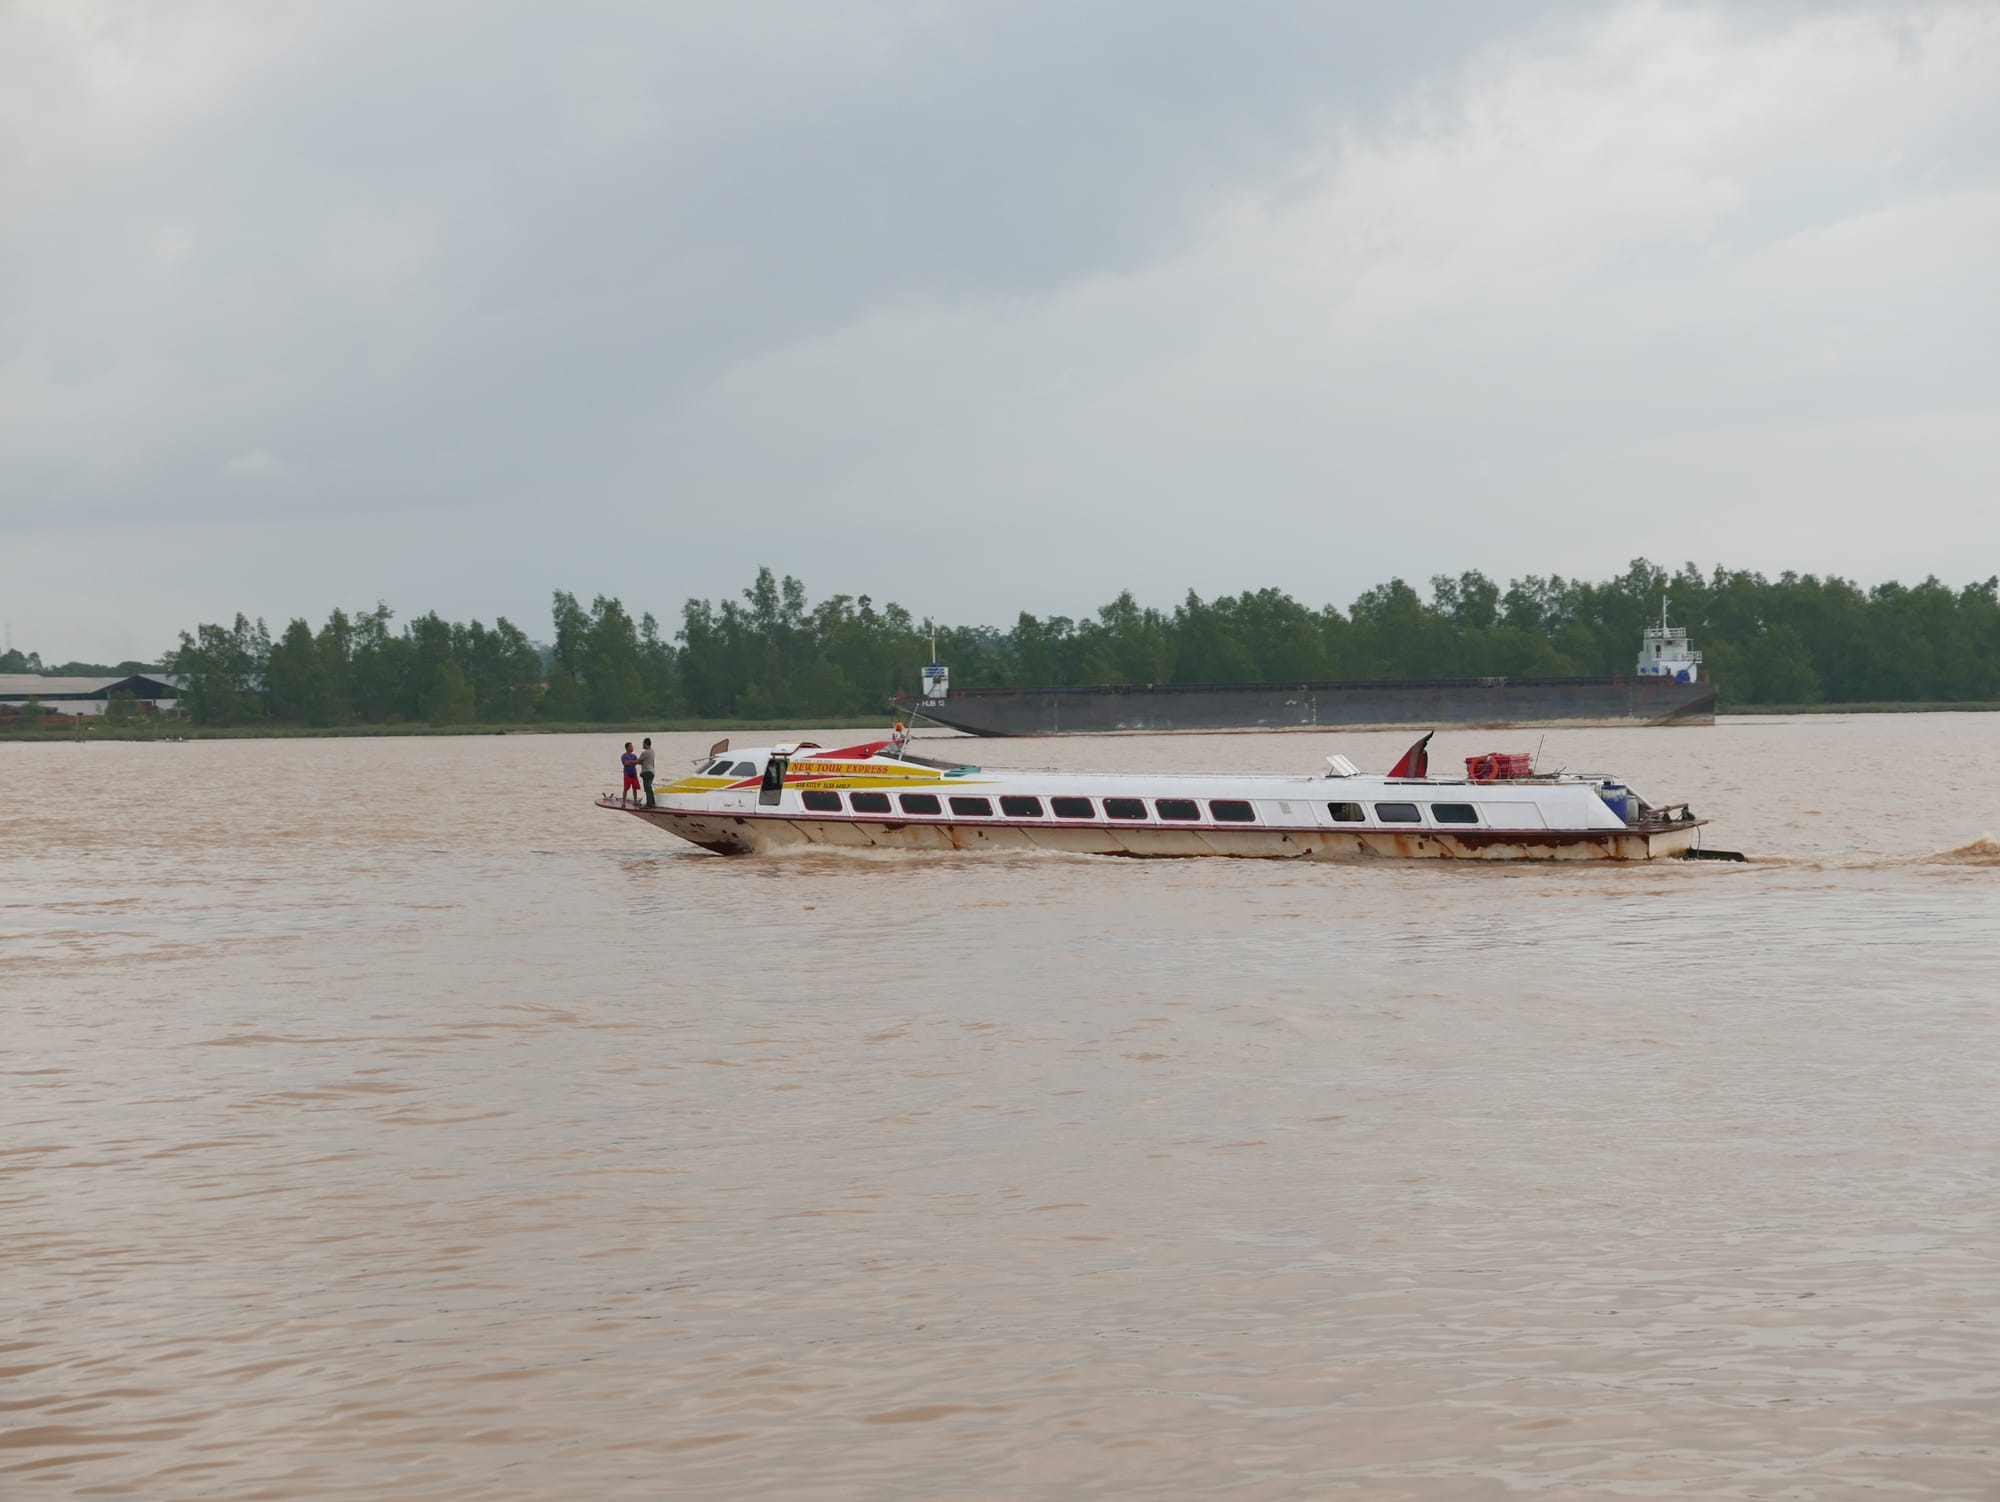 Photo by Author — a Sibu ‘Torpedo’ Boat — the local ‘bus’